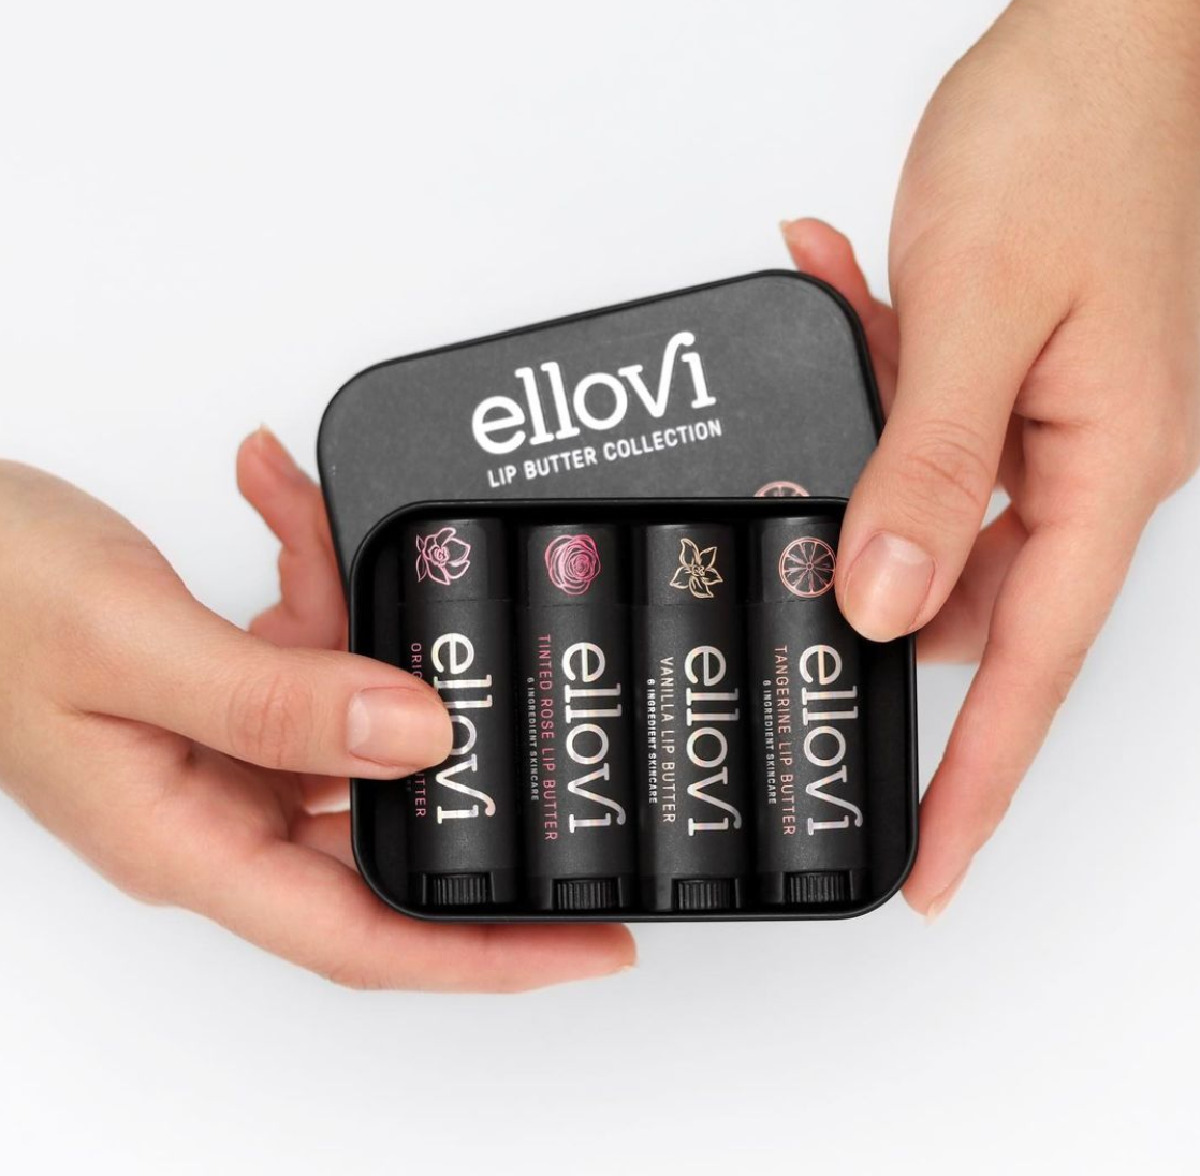 Two hands holding a black gift box of Ellovi Lip Butter Collection balms against a white background. 